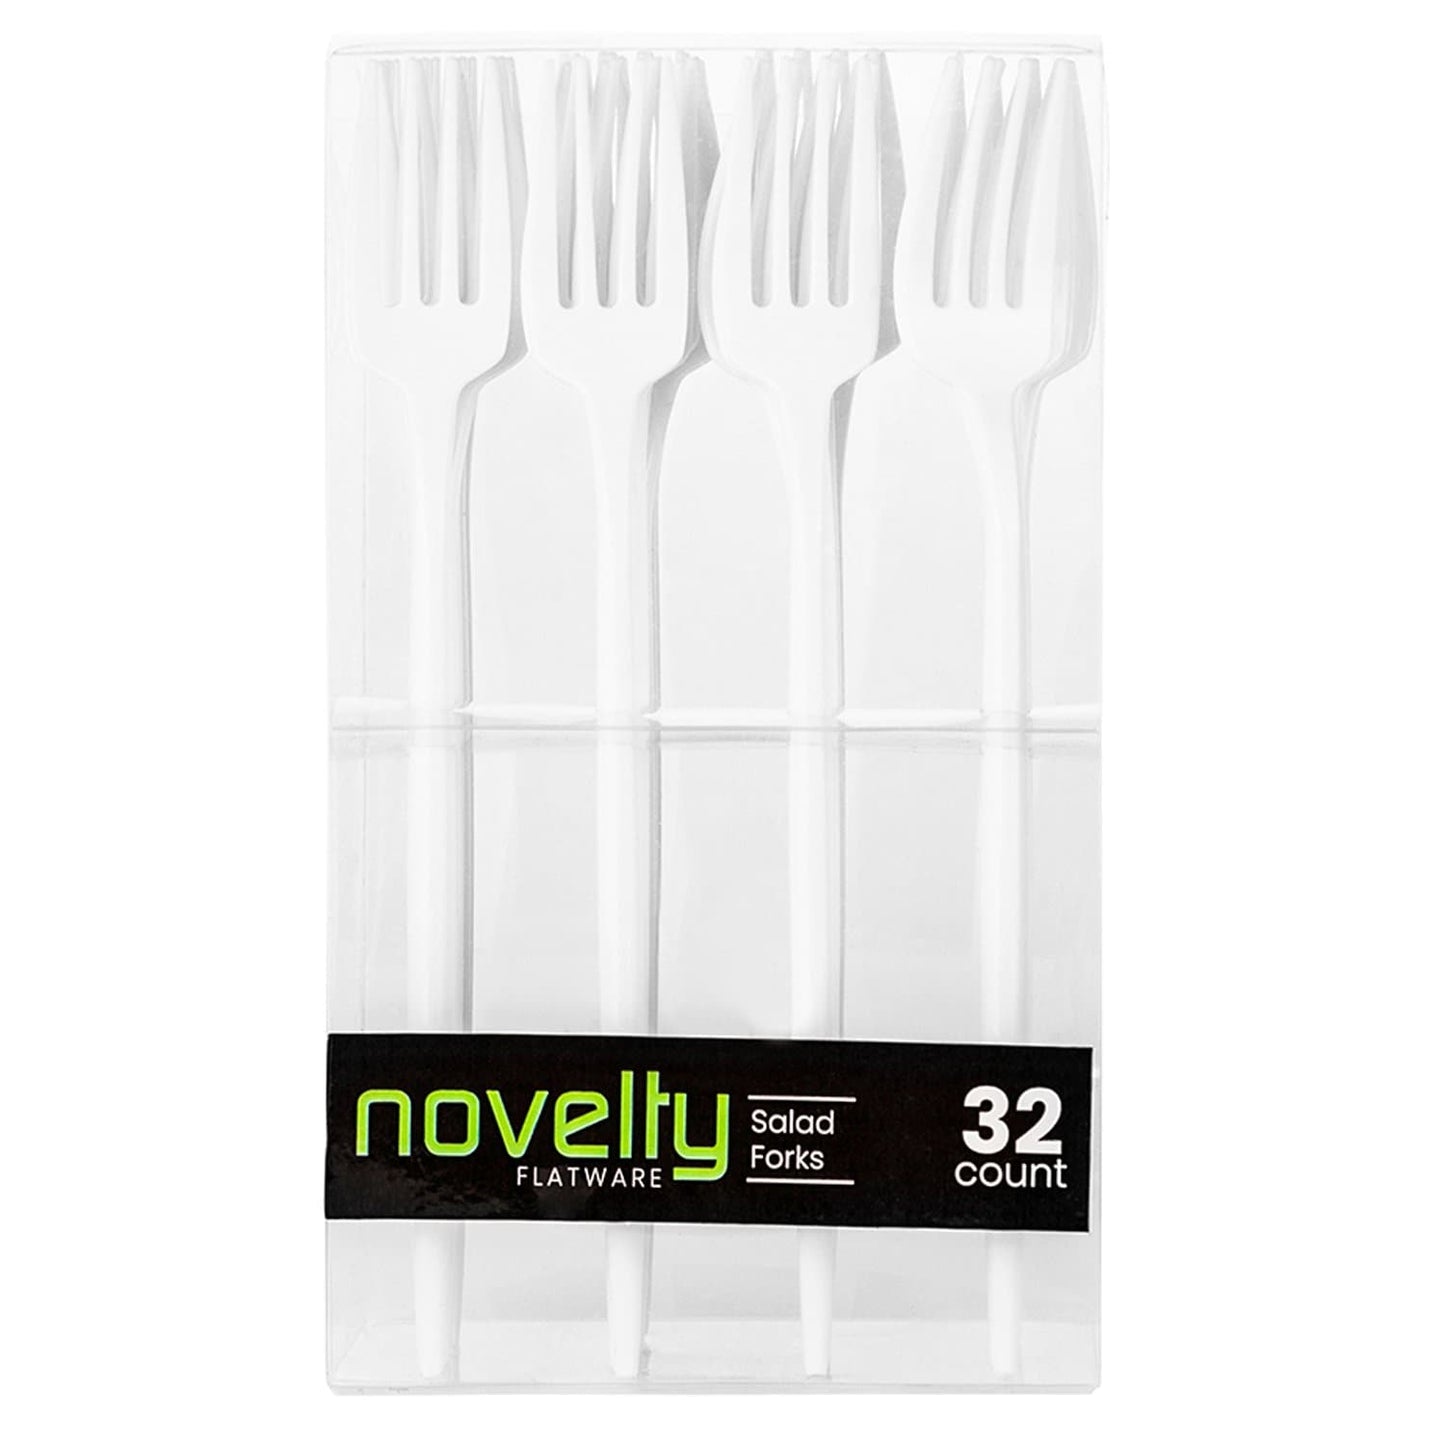 NOVELTY FLATWARE DINNER SALAD FORKS WHITE Tablesettings Blue Sky 32 Pieces  